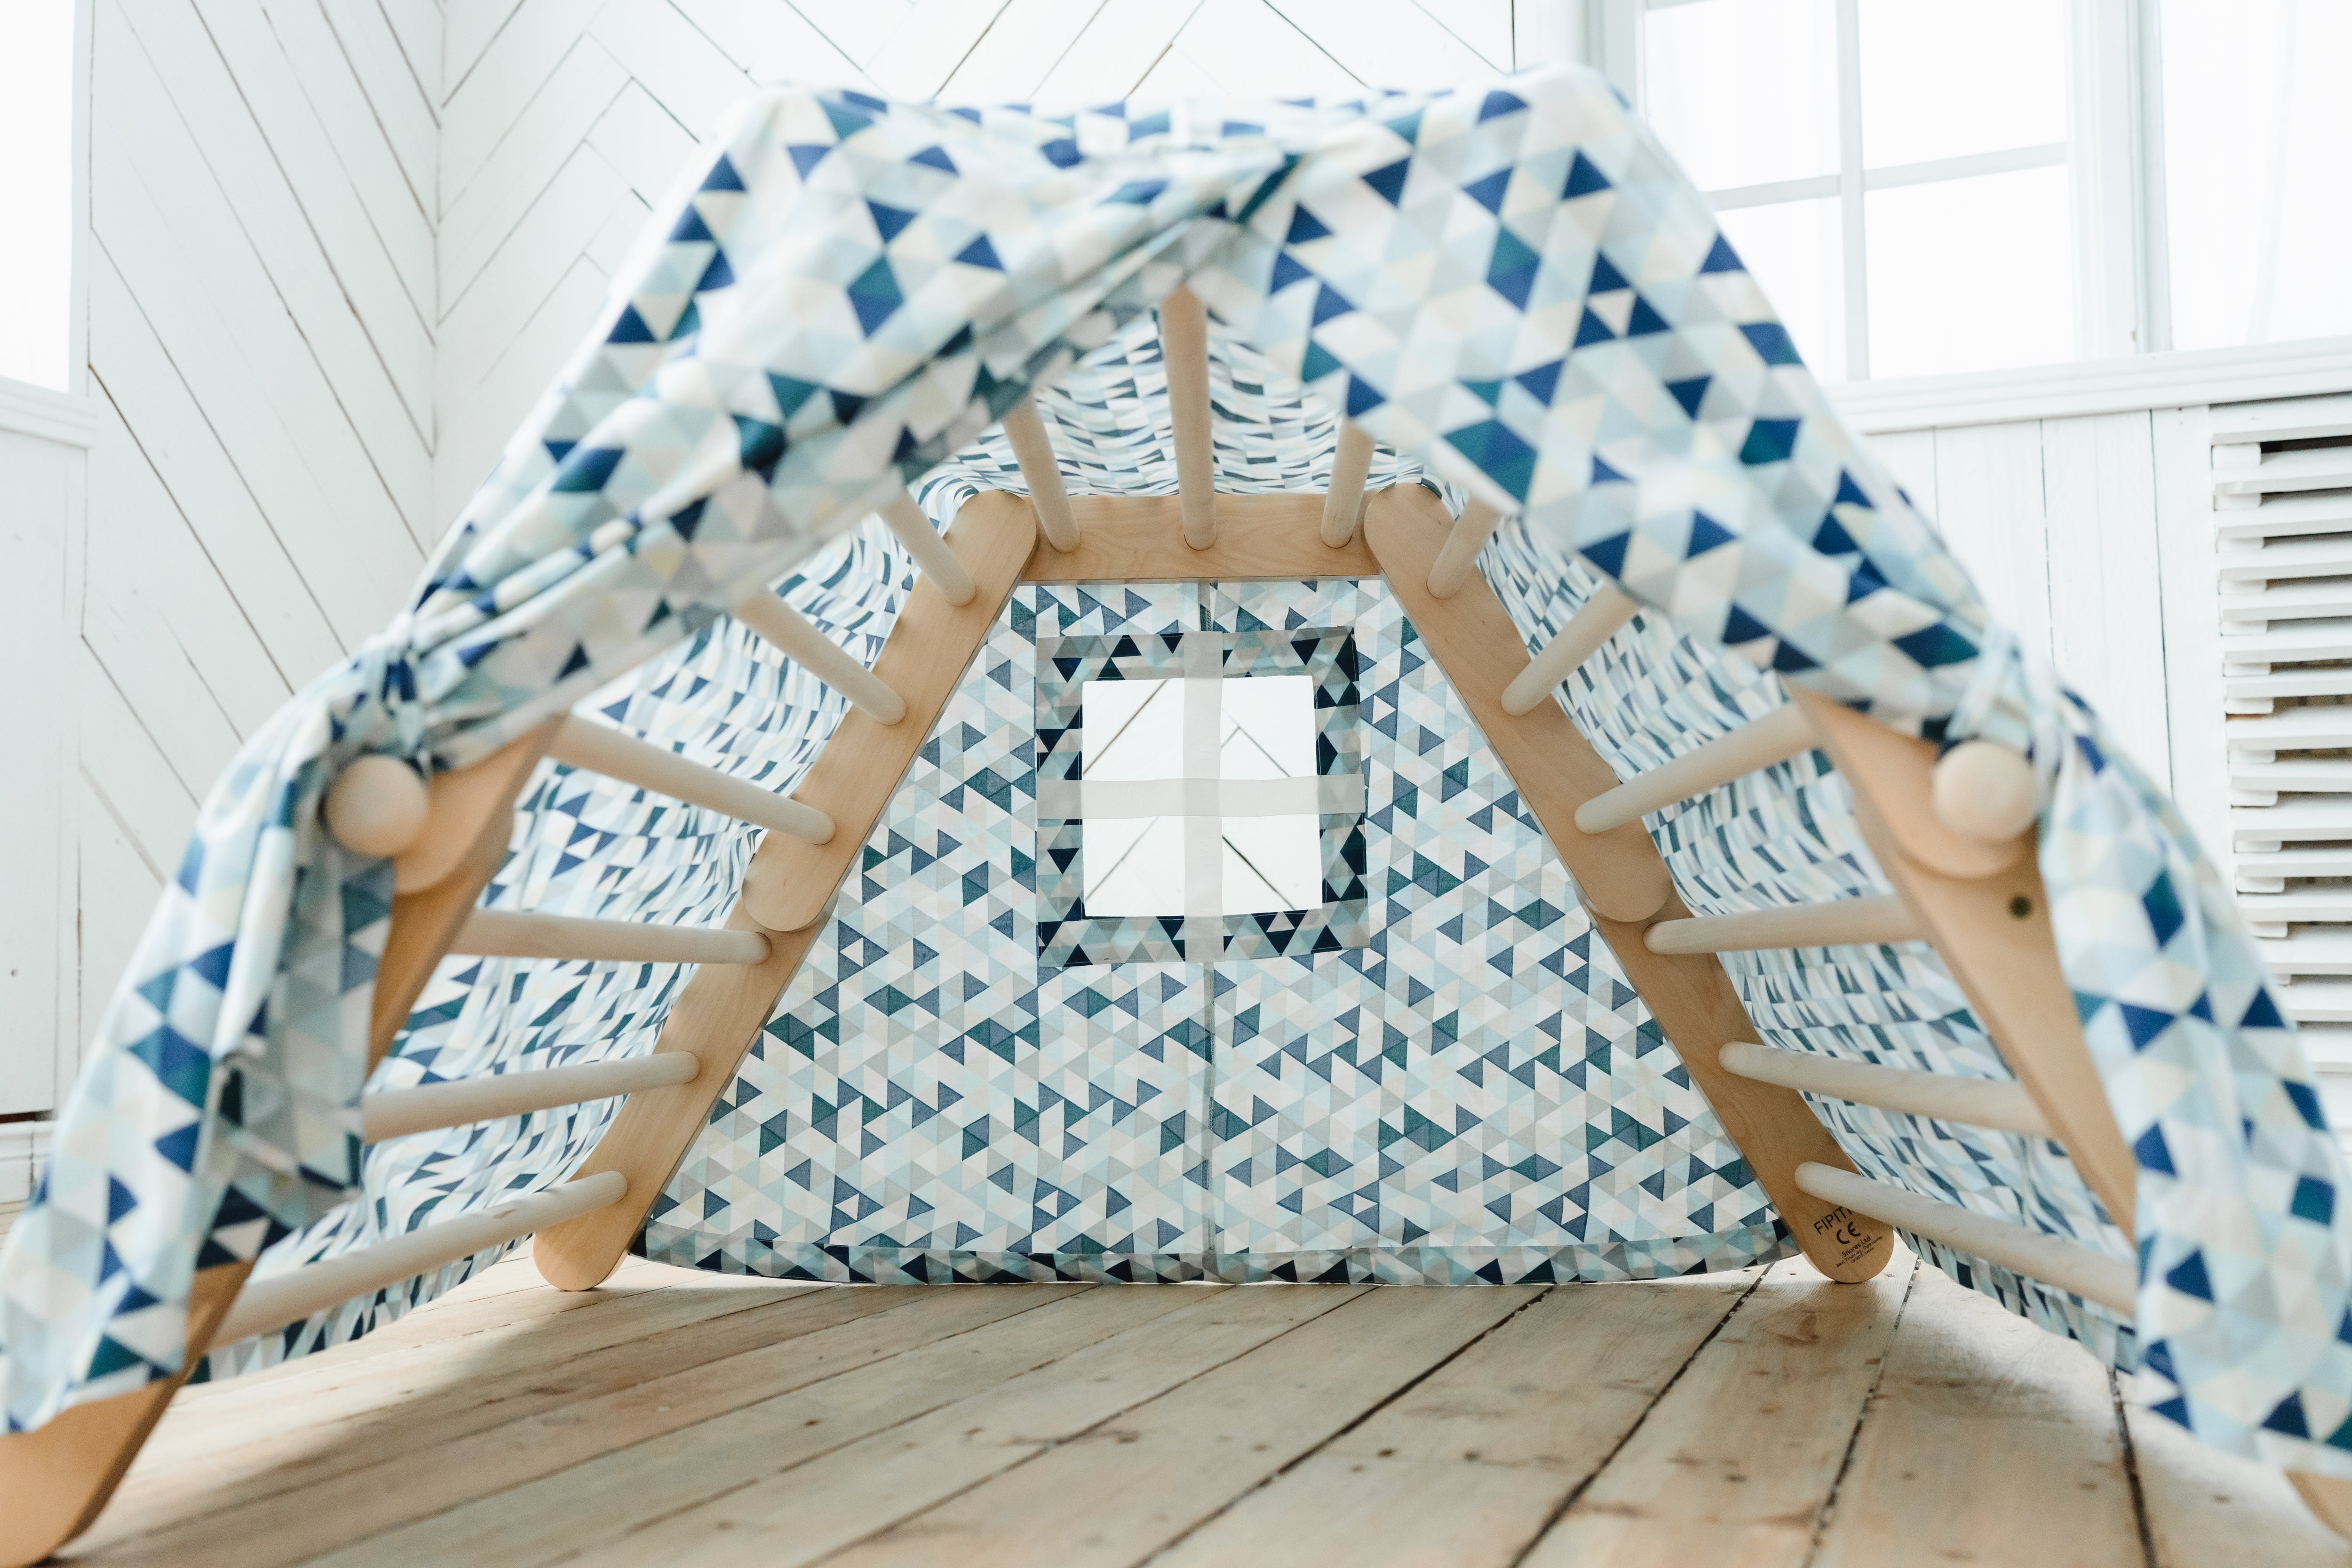 Play tent for climbing frame "Fipitri"